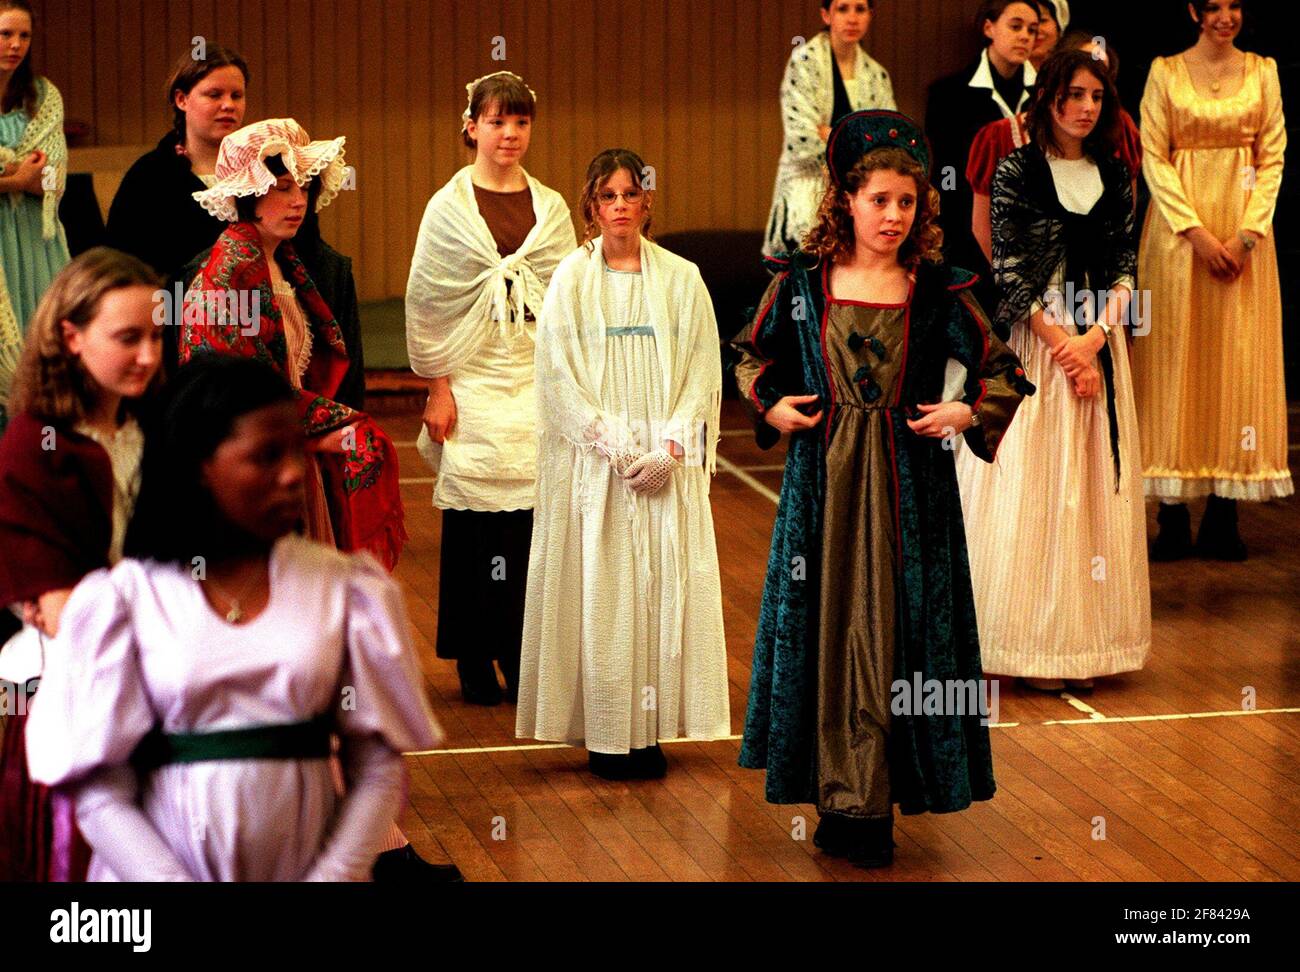 Pupils at New Hall School Chelmsford January 1999 New Hall School Chelmsford ( a Catholic girls school) is 357 years old this year  marks the 200 anniversary of the school at it's present site and to mark this the pupils and staff dressed in  costumes that would have been worn at the time and had lessons along the same theme  In the picture some of the girls are learning to dance to a minuet dressed as 19th century pupils Stock Photo